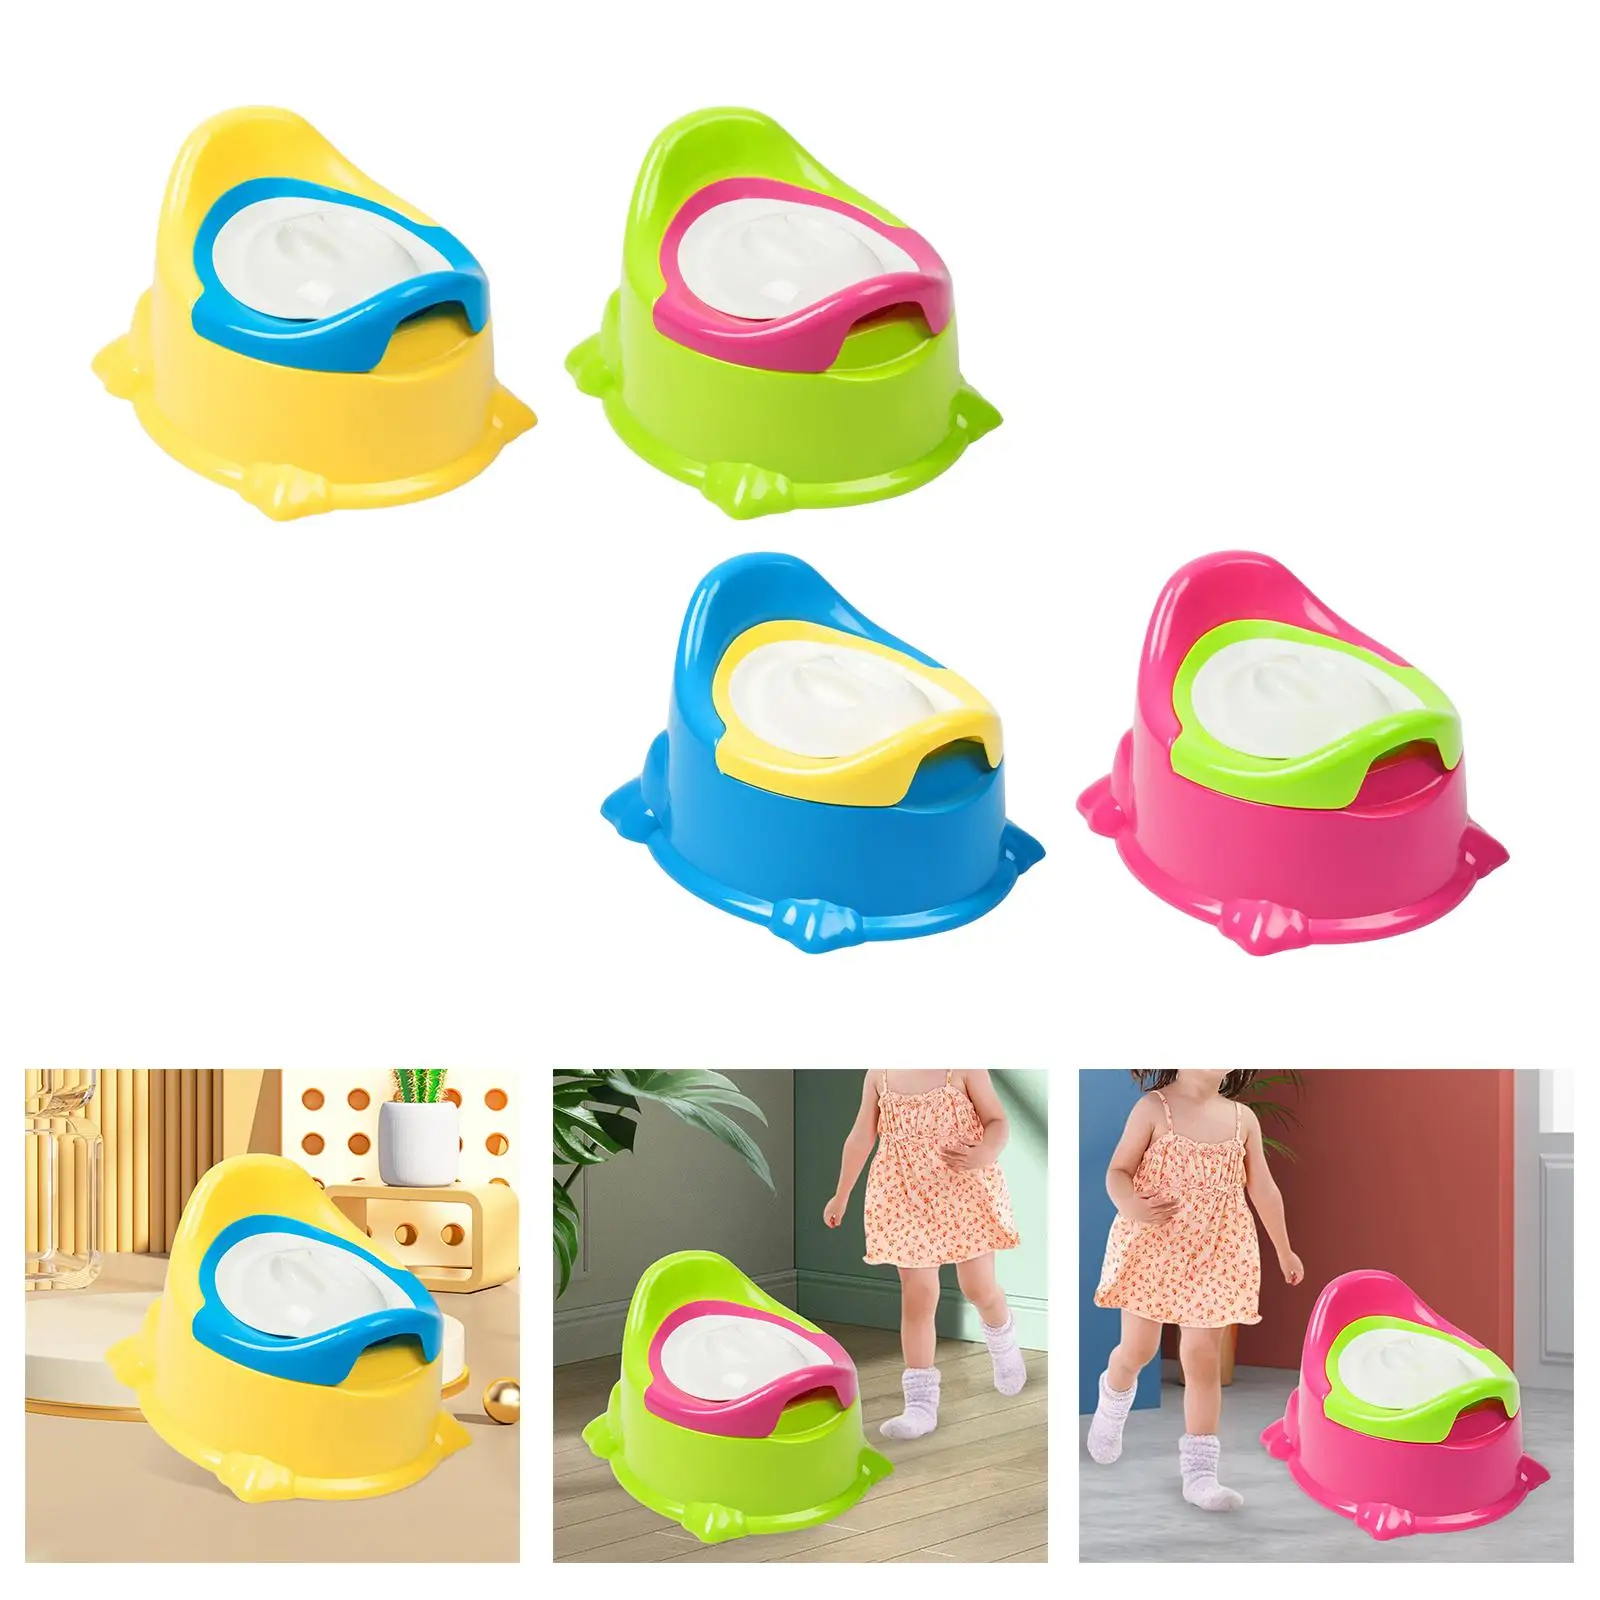 Baby Potty Toilet Training Seat with Removable Container Easy Clean Potty Chair for Babies 6-12 Month Travel Home